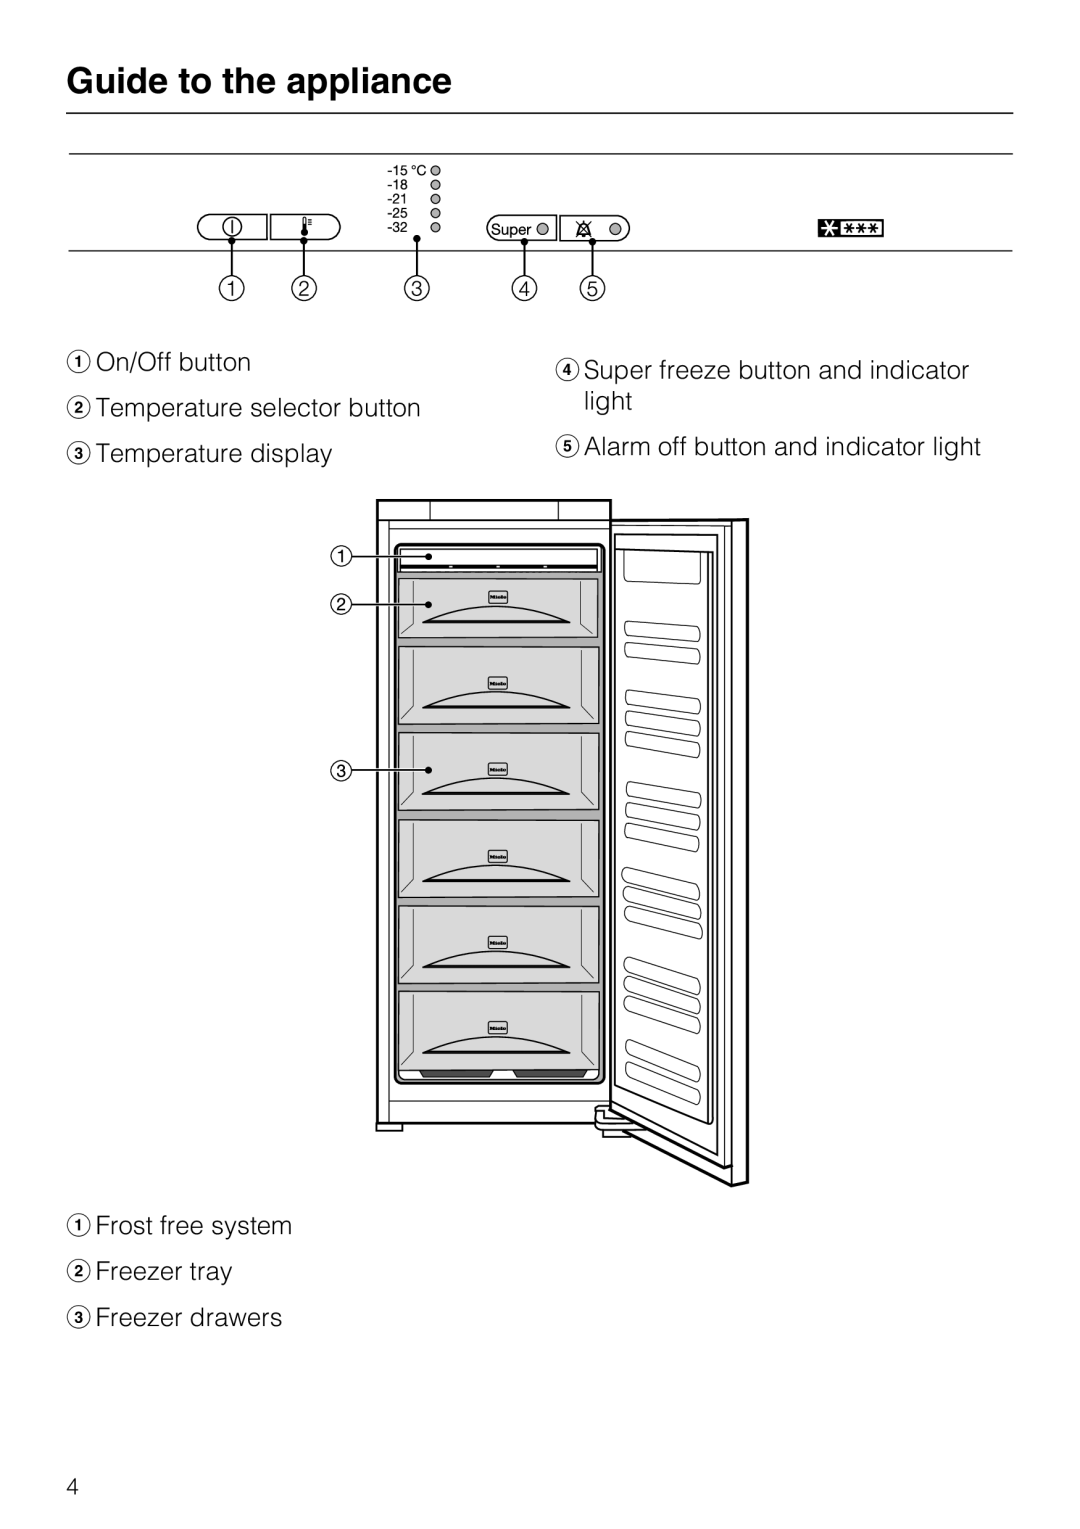 Miele FN 12620 S Guide to the appliance, a On/Off button, a Frost free system b Freezer tray, c Freezer drawers 